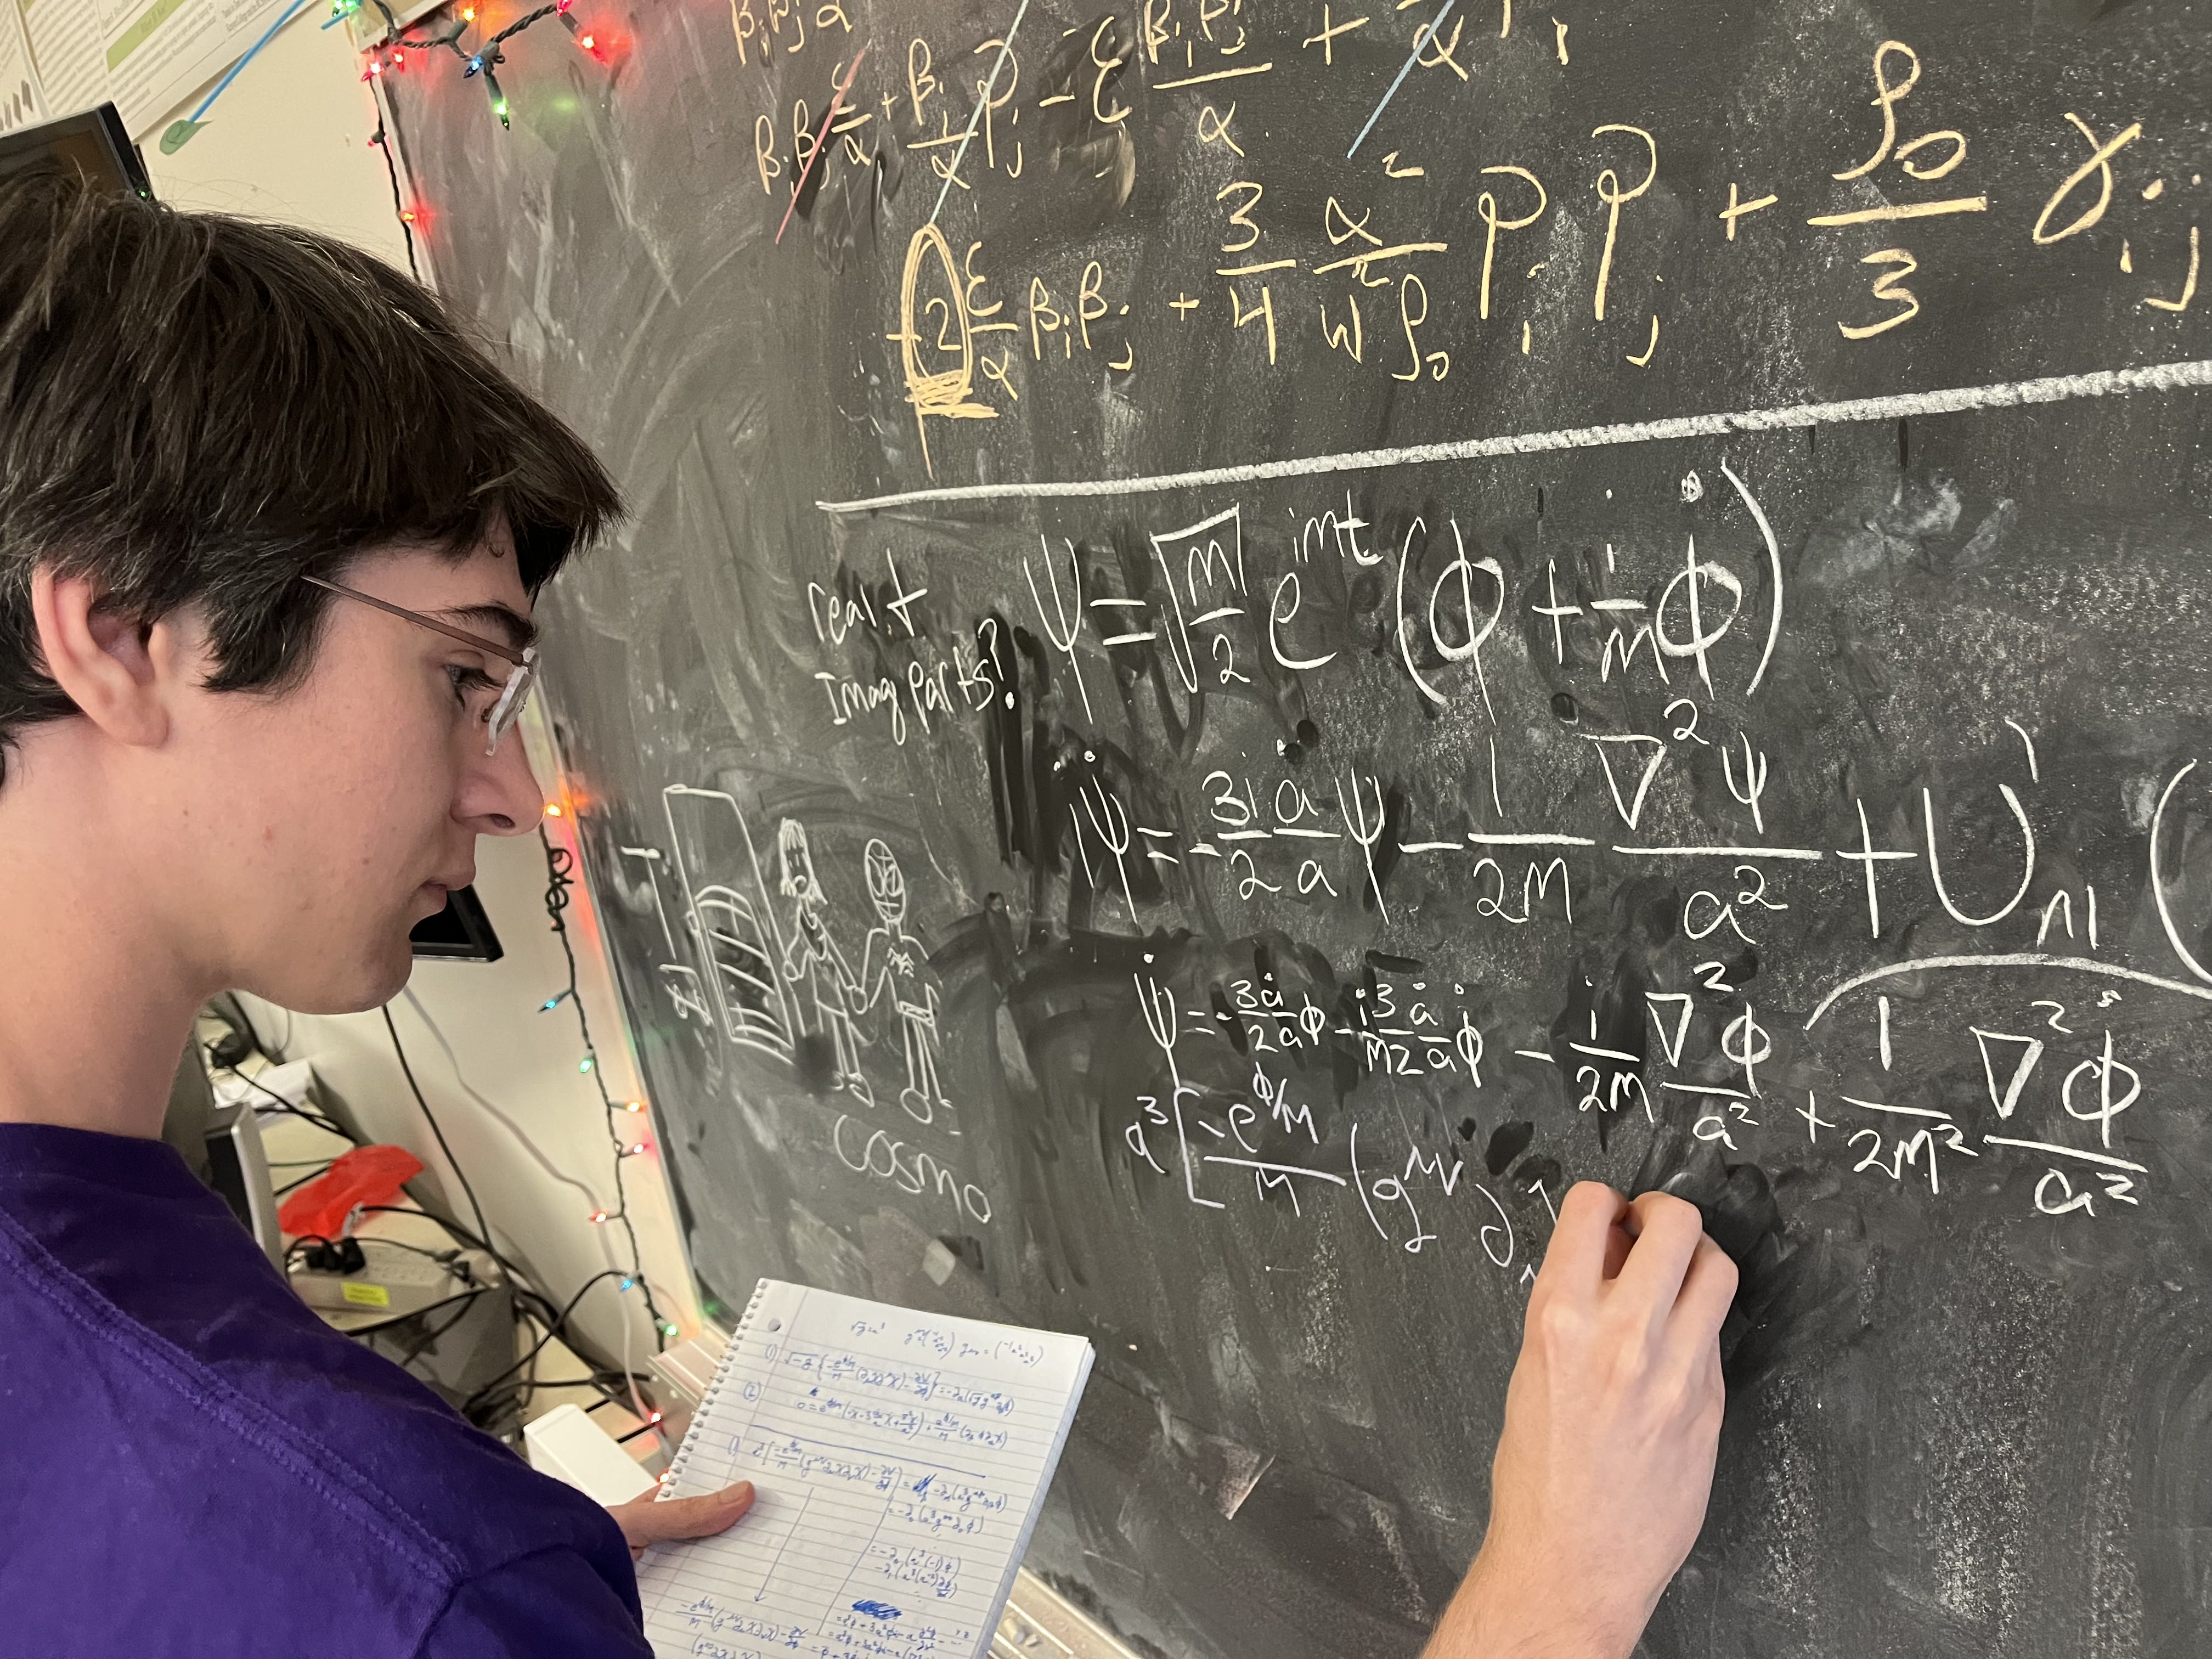 Reid Pfaltzgraff-Carlson ’26 is a Summer Science Scholar working on a project involving modeling how particles might be created in the very early universe. His mentor for this work is Tom Giblin, professor of physics